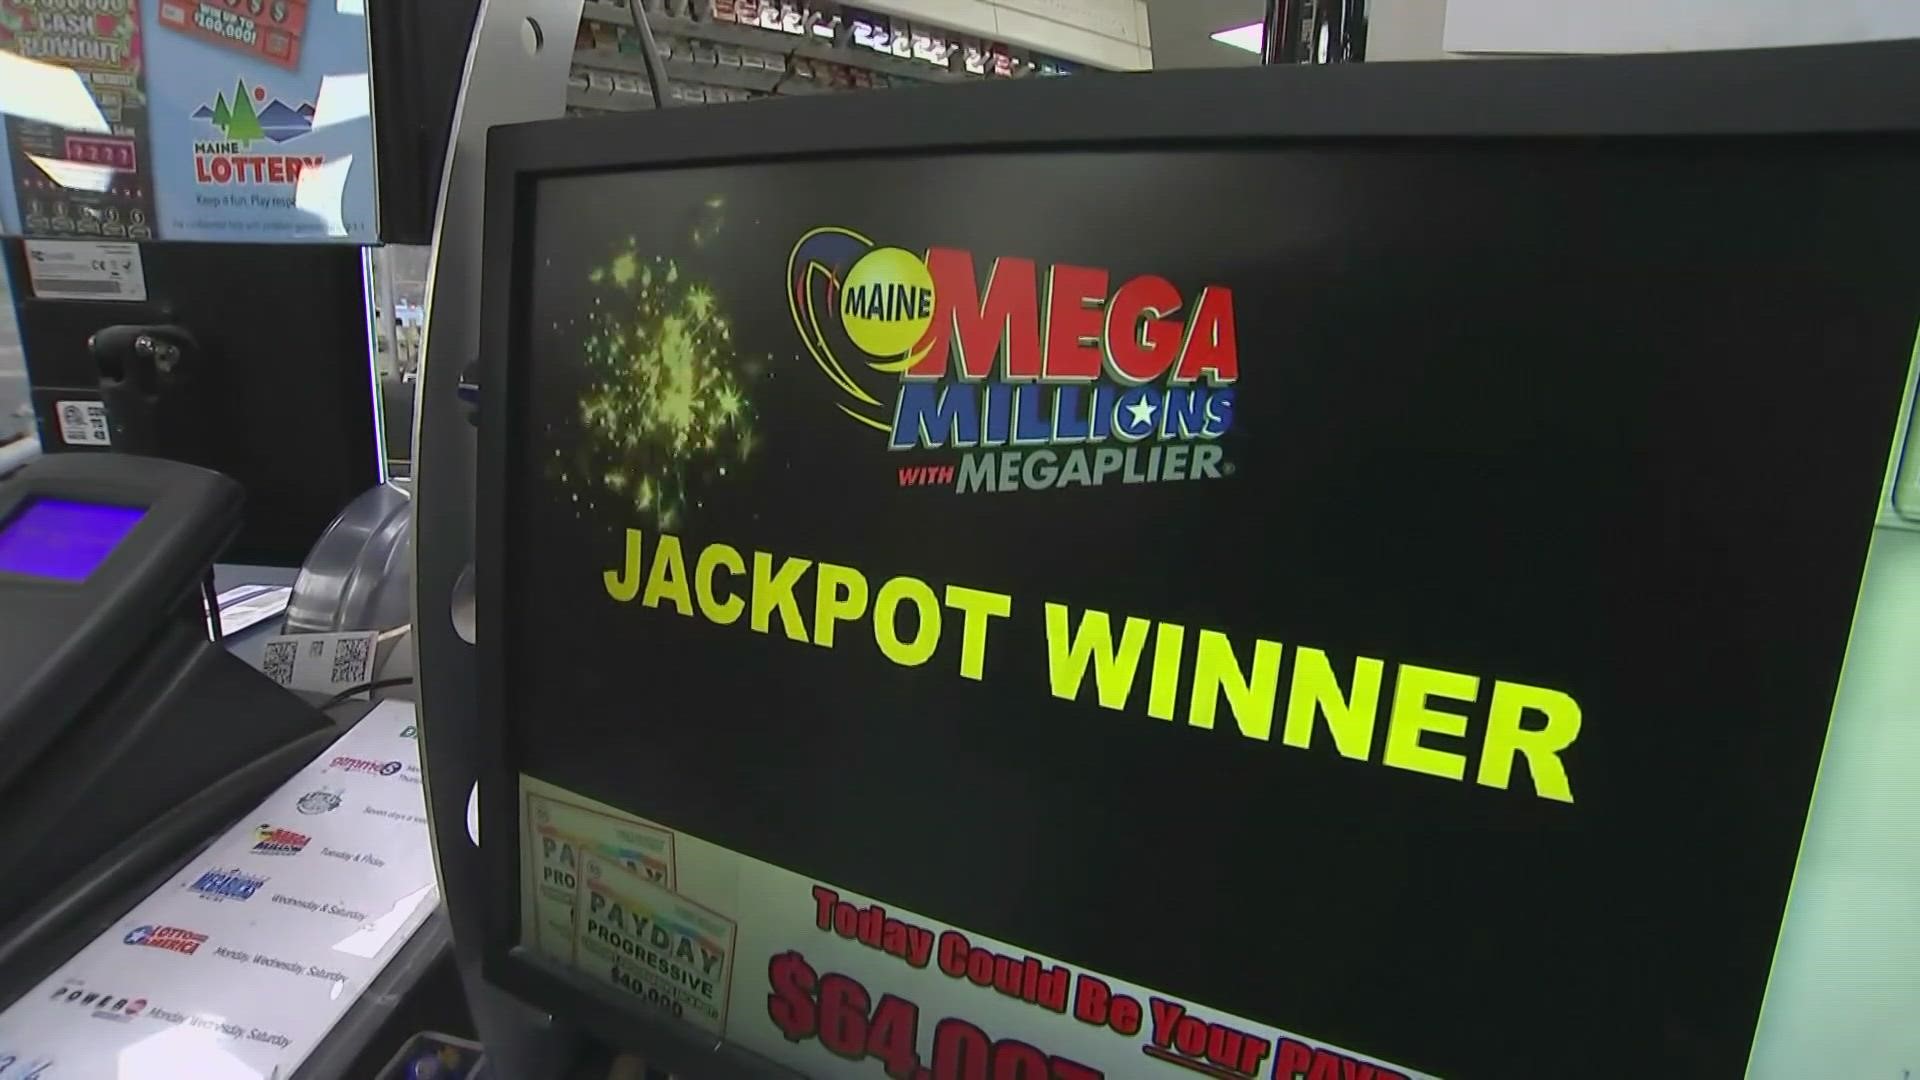 The winning ticket was sold in Maine, but financial planners say the winner would be smart to remain anonymous. Here's why.